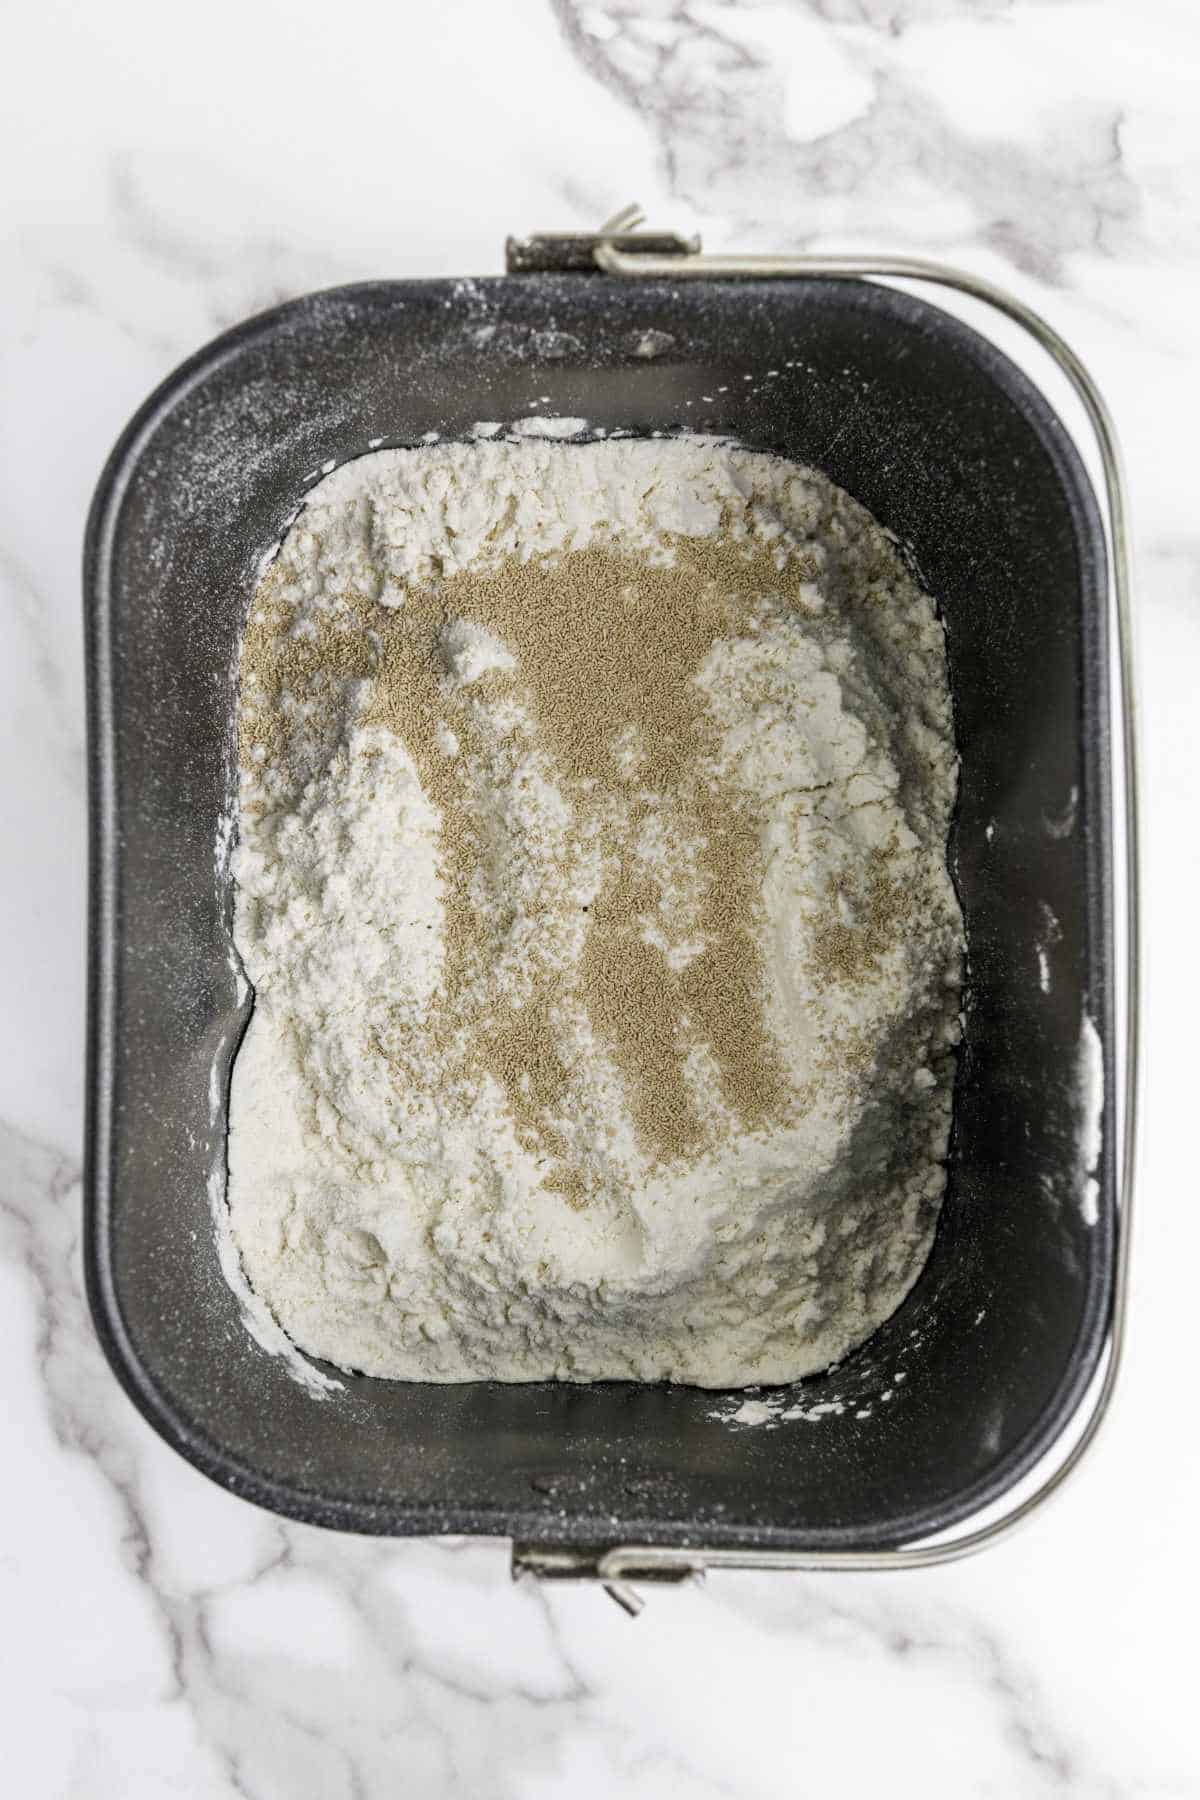 flour and yeast added to a bread machine baking pan.